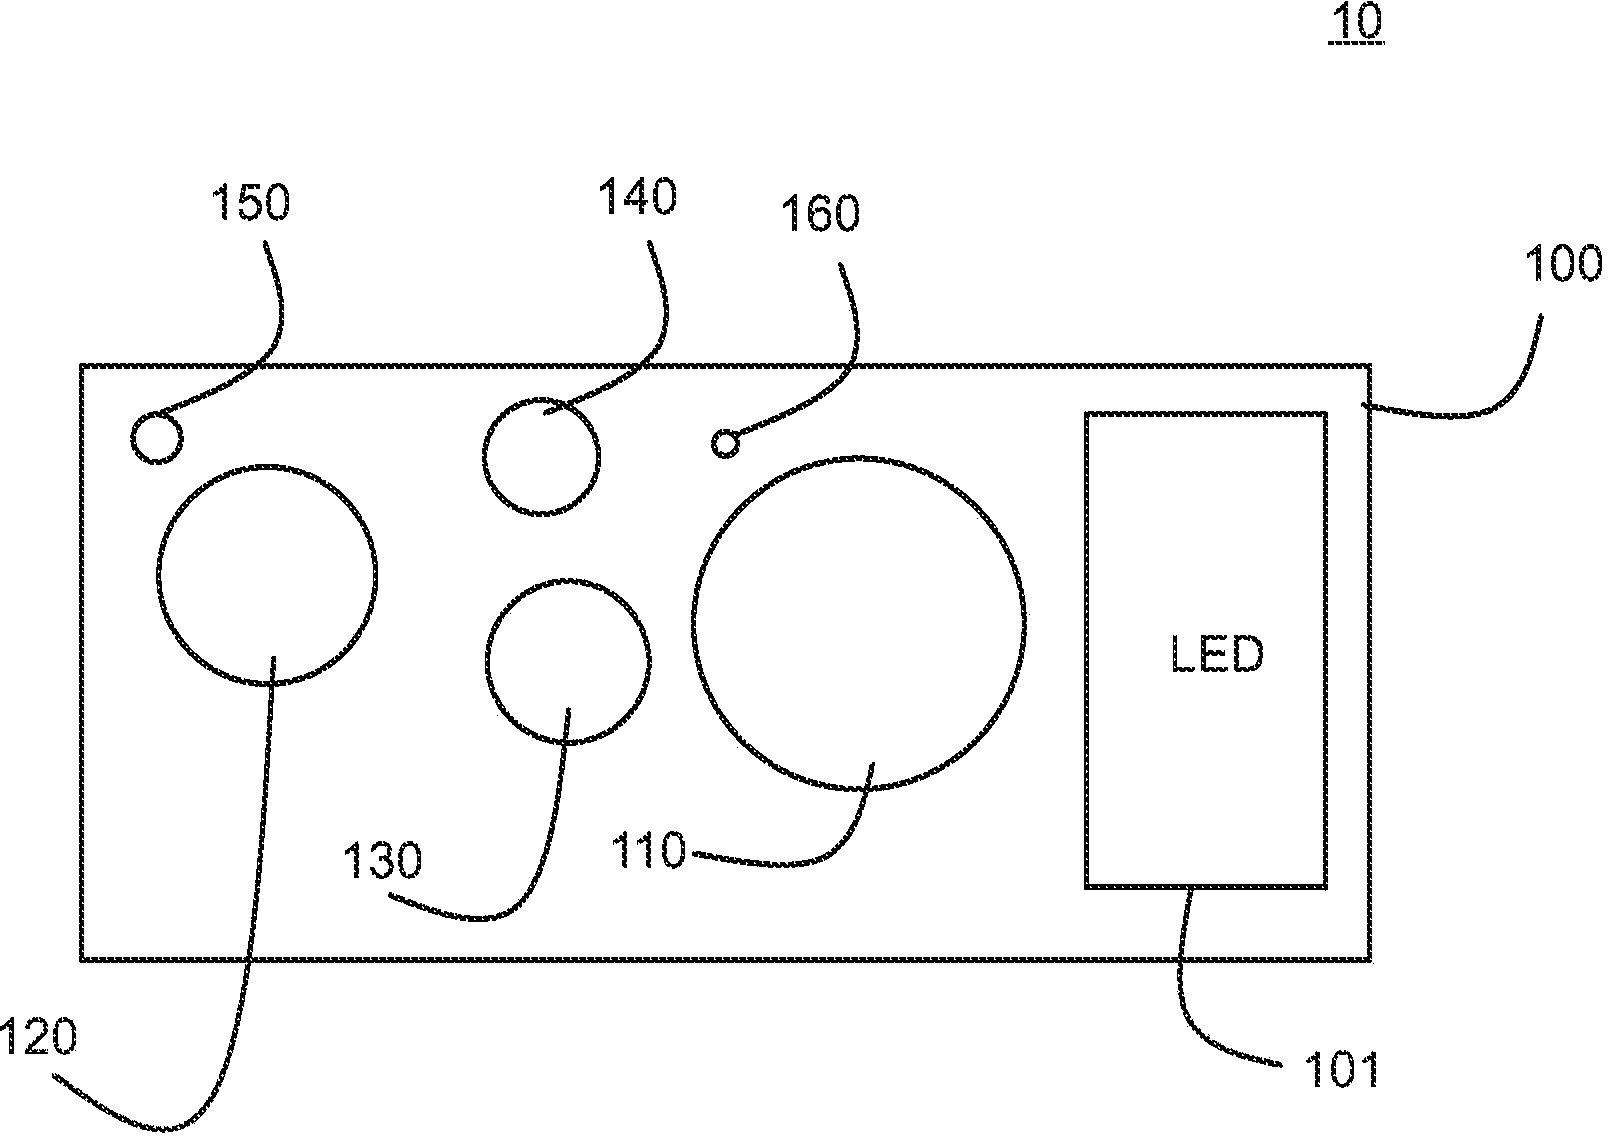 Plant illumination device and method for dark growth chambers